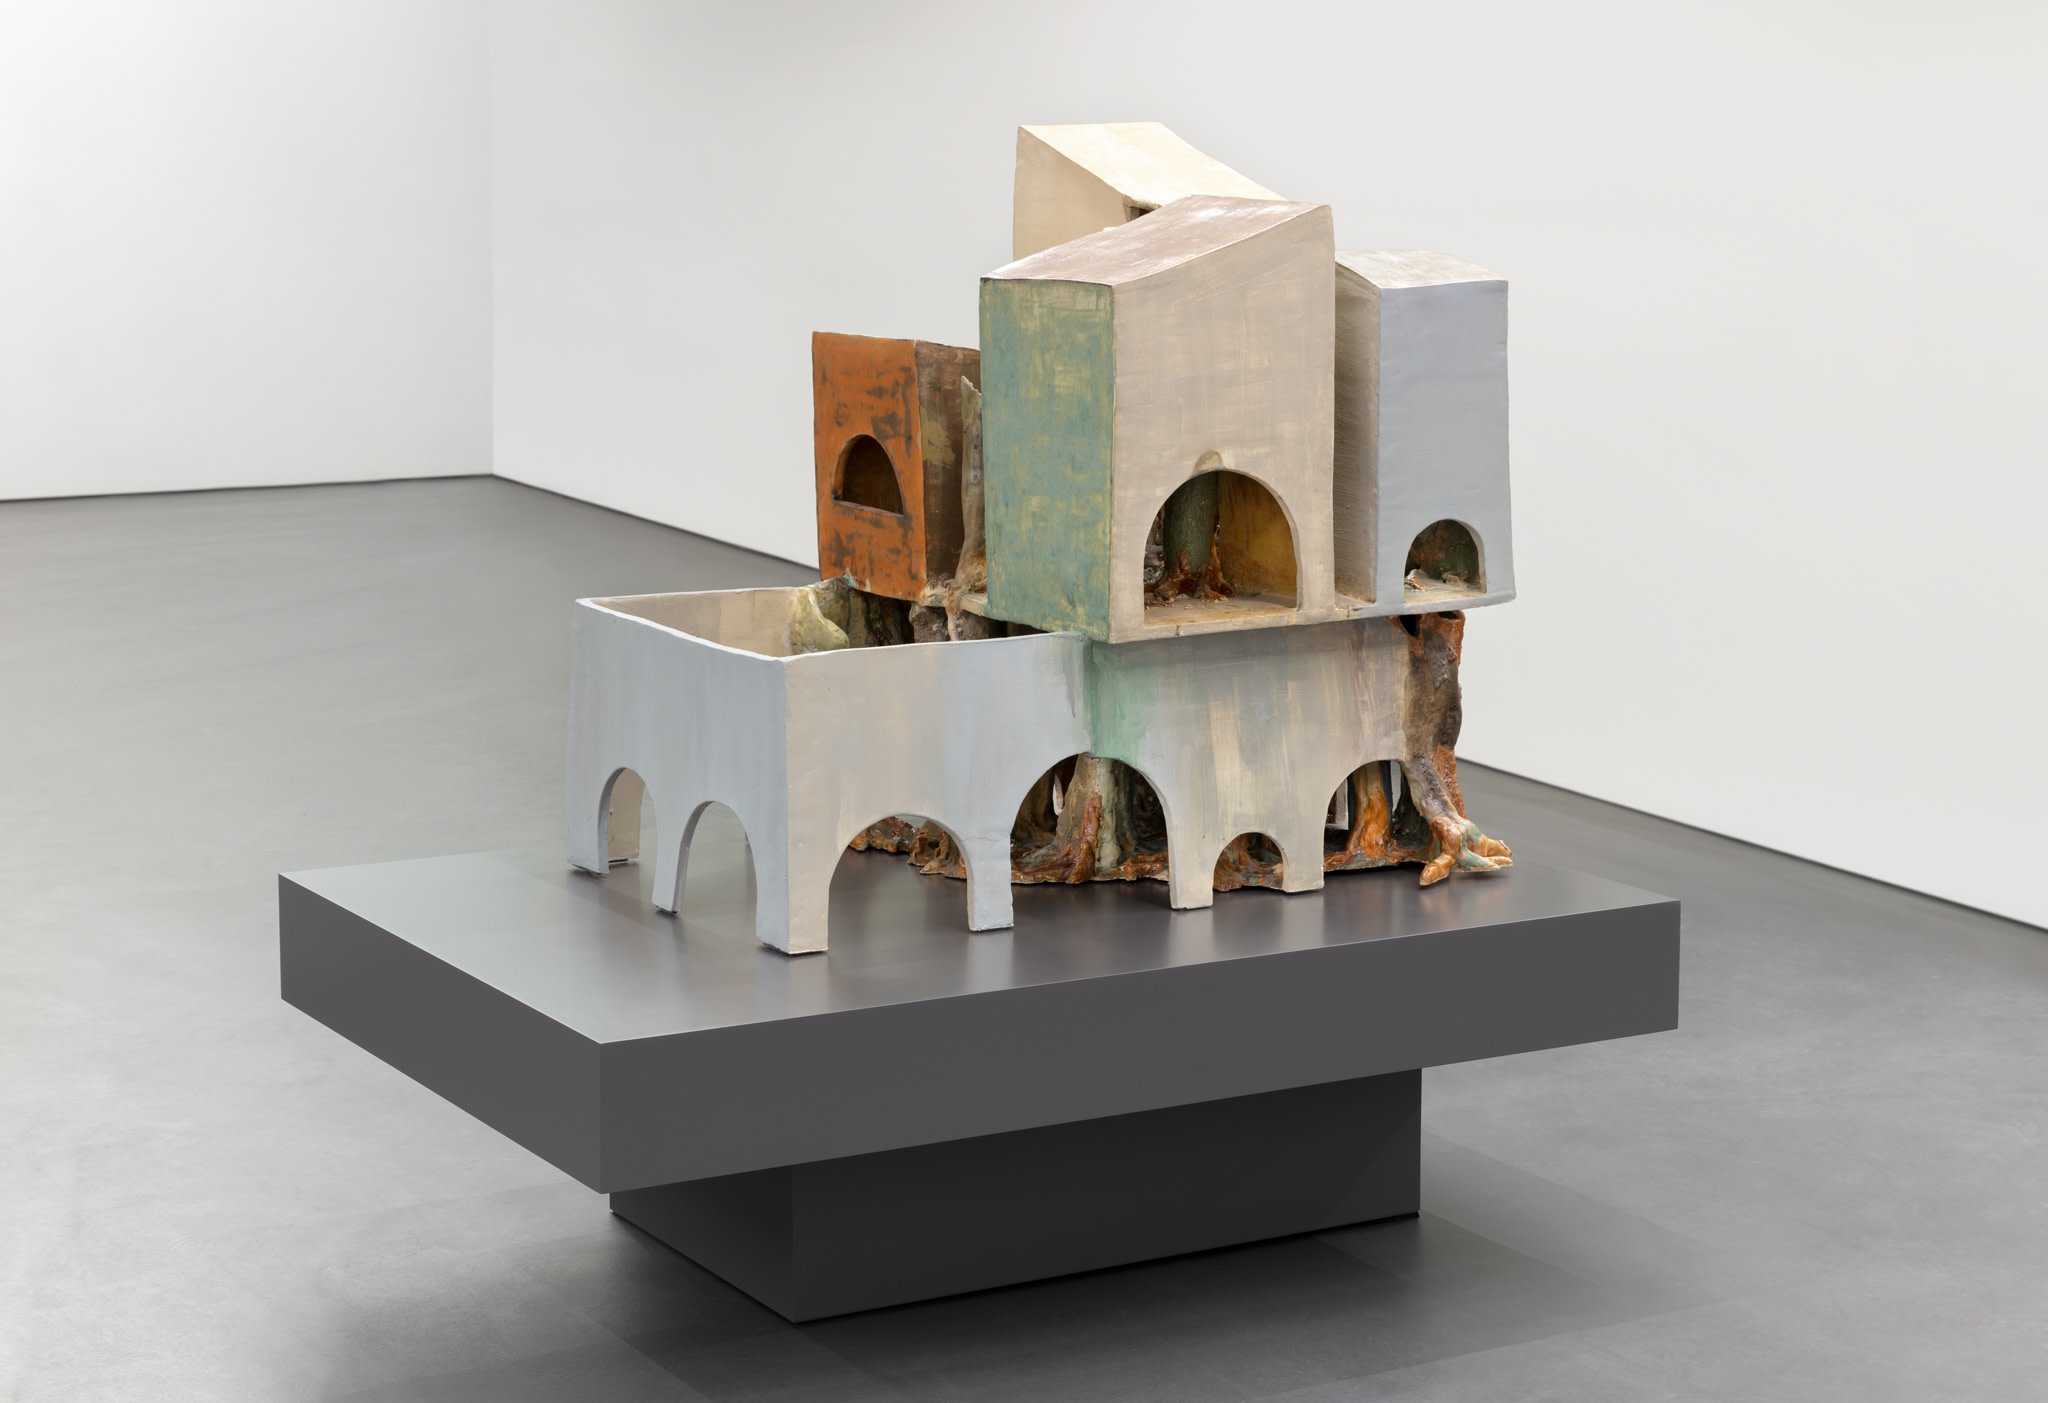 Isa Melsheimer, false ruins and lost innocence 1, 2020, large ceramics, plinth, 104 x 80,5 x 122 cm (41 x 31 3/4 x 48 1/8 in) (work), 50 x 160 x 110 cm (19 3/4 x 63 x 43 1/4 in) (plinth). Photo © Andrea Rossetti